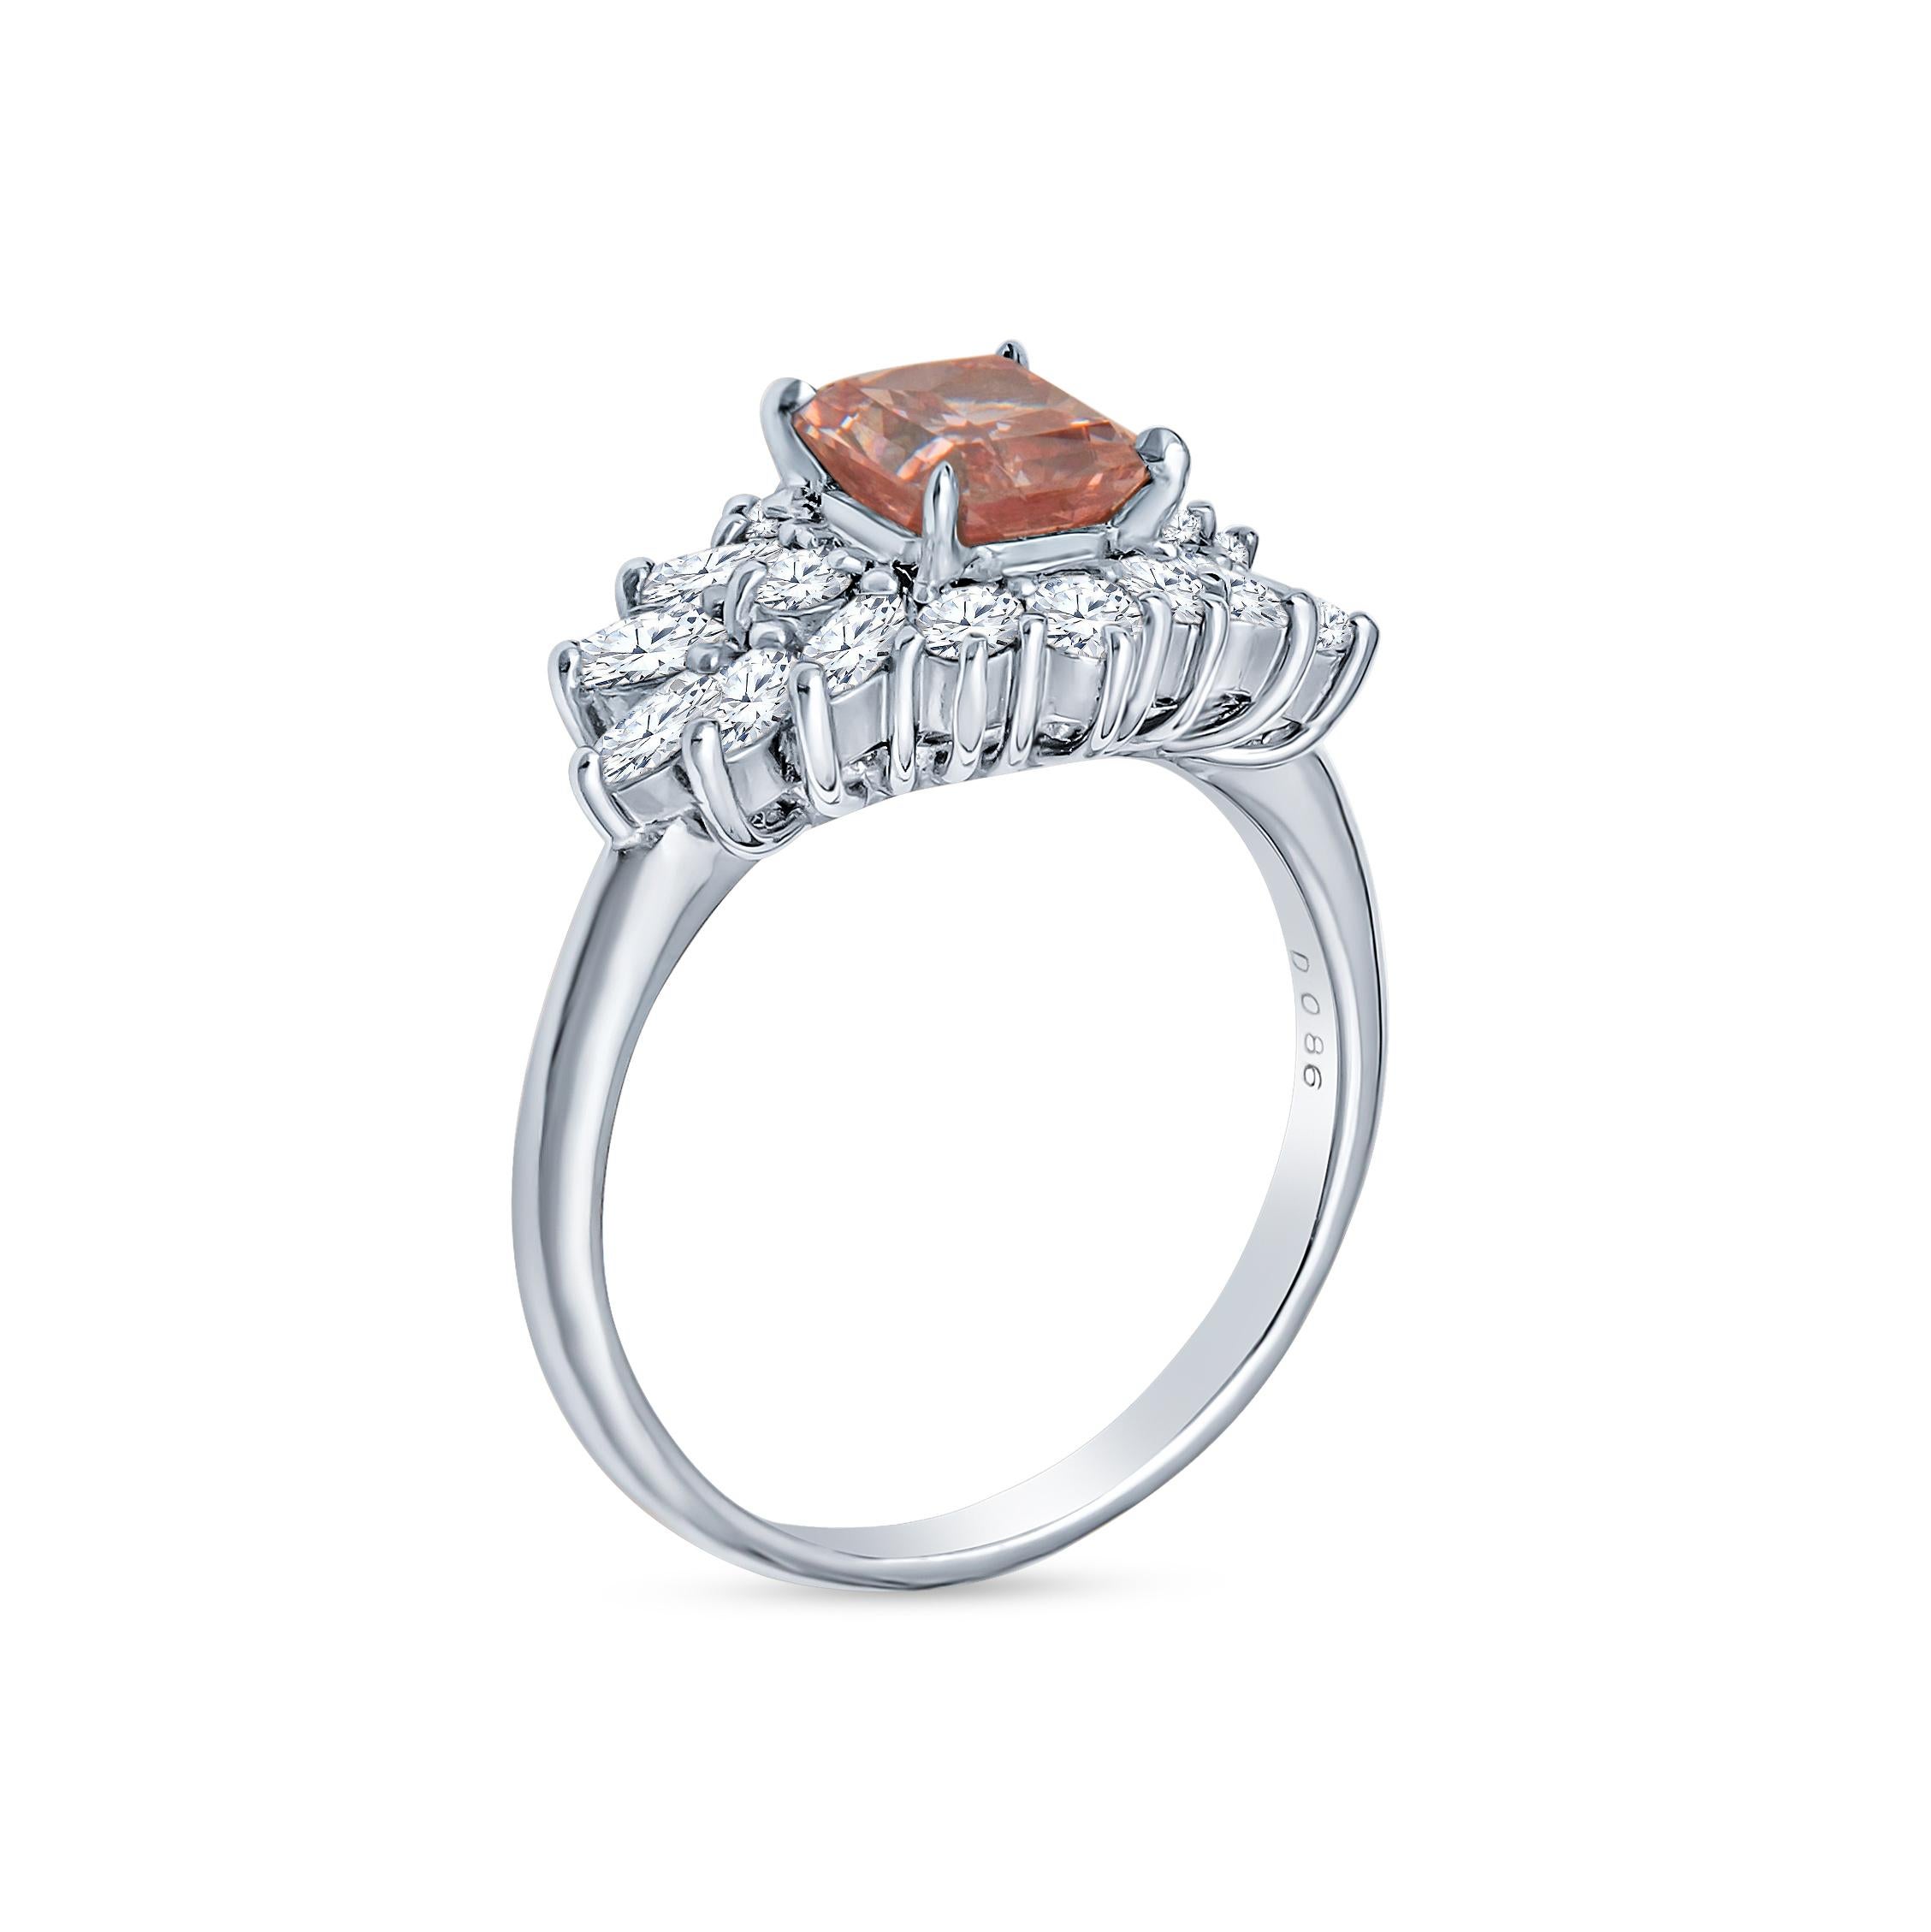 This beautiful ring features a spectacular 1.09 Carat Radiant cut Natural Fancy Intense Pink Natural Diamond certified as VS1 by the GIA. It is accented with a spread of marquise and round brilliant cut diamonds weighing approximately 0.86 carats in